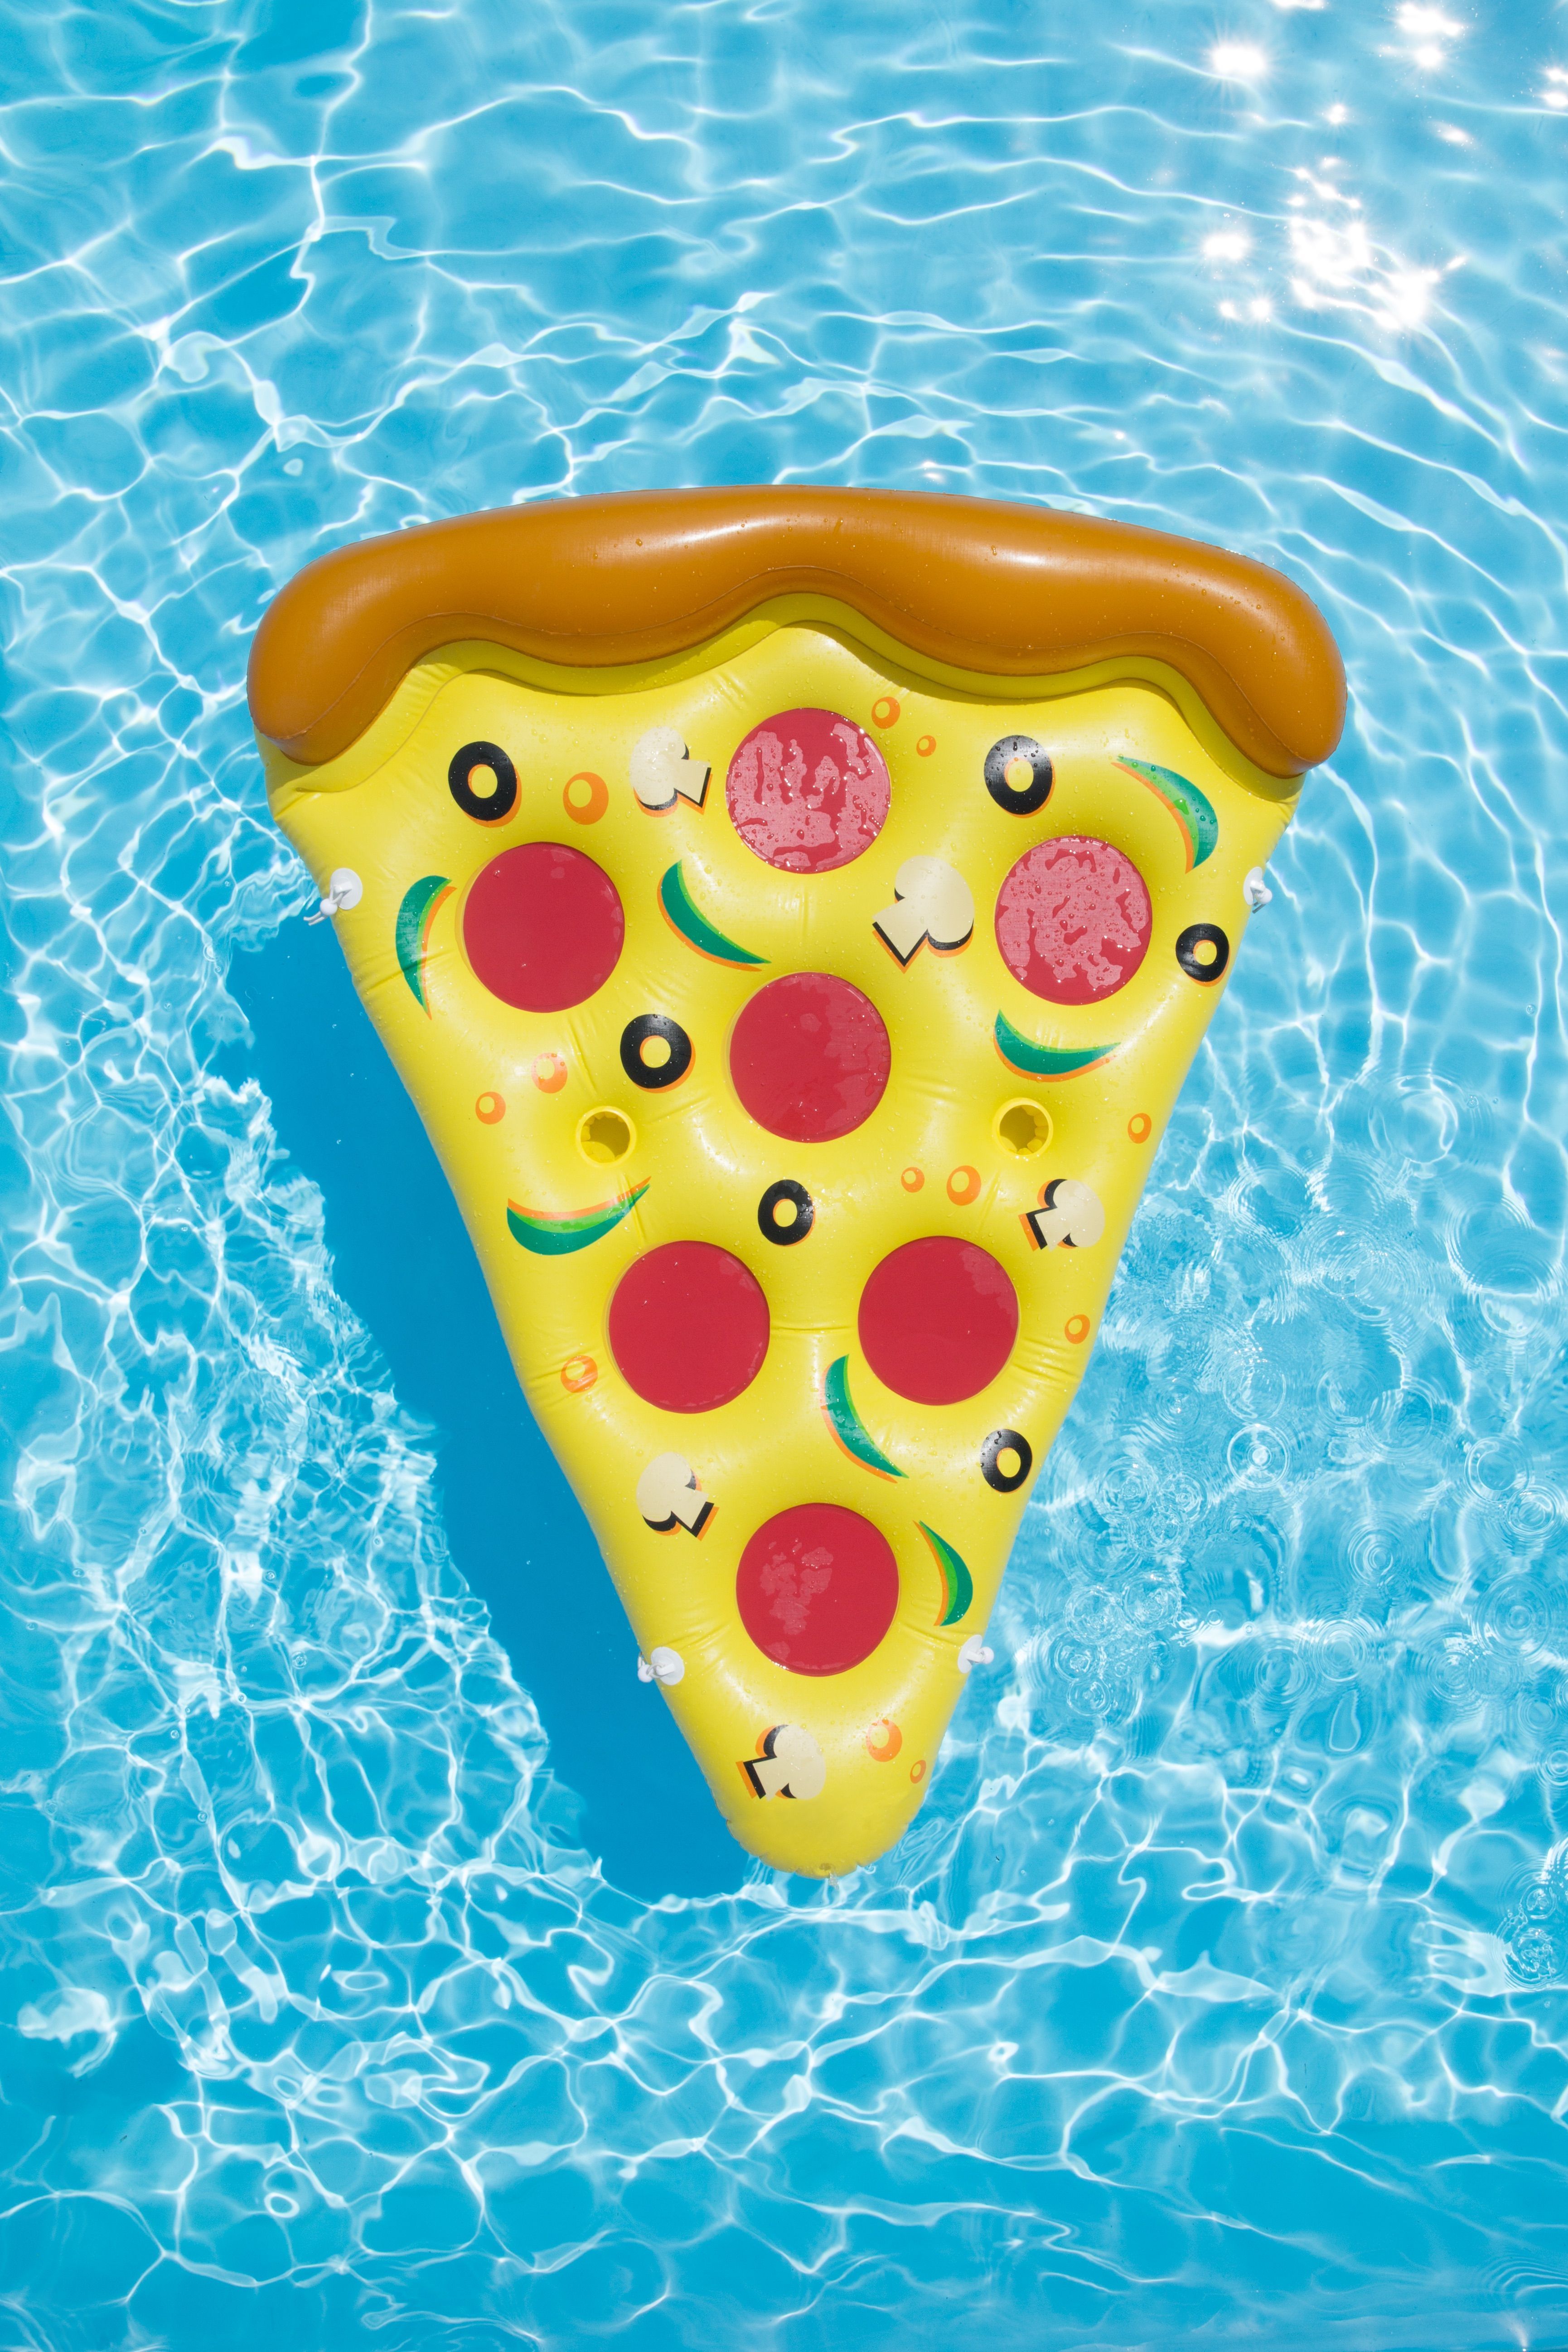 Awesome Pool Floats Every Food Lover Should Own. Cool pool